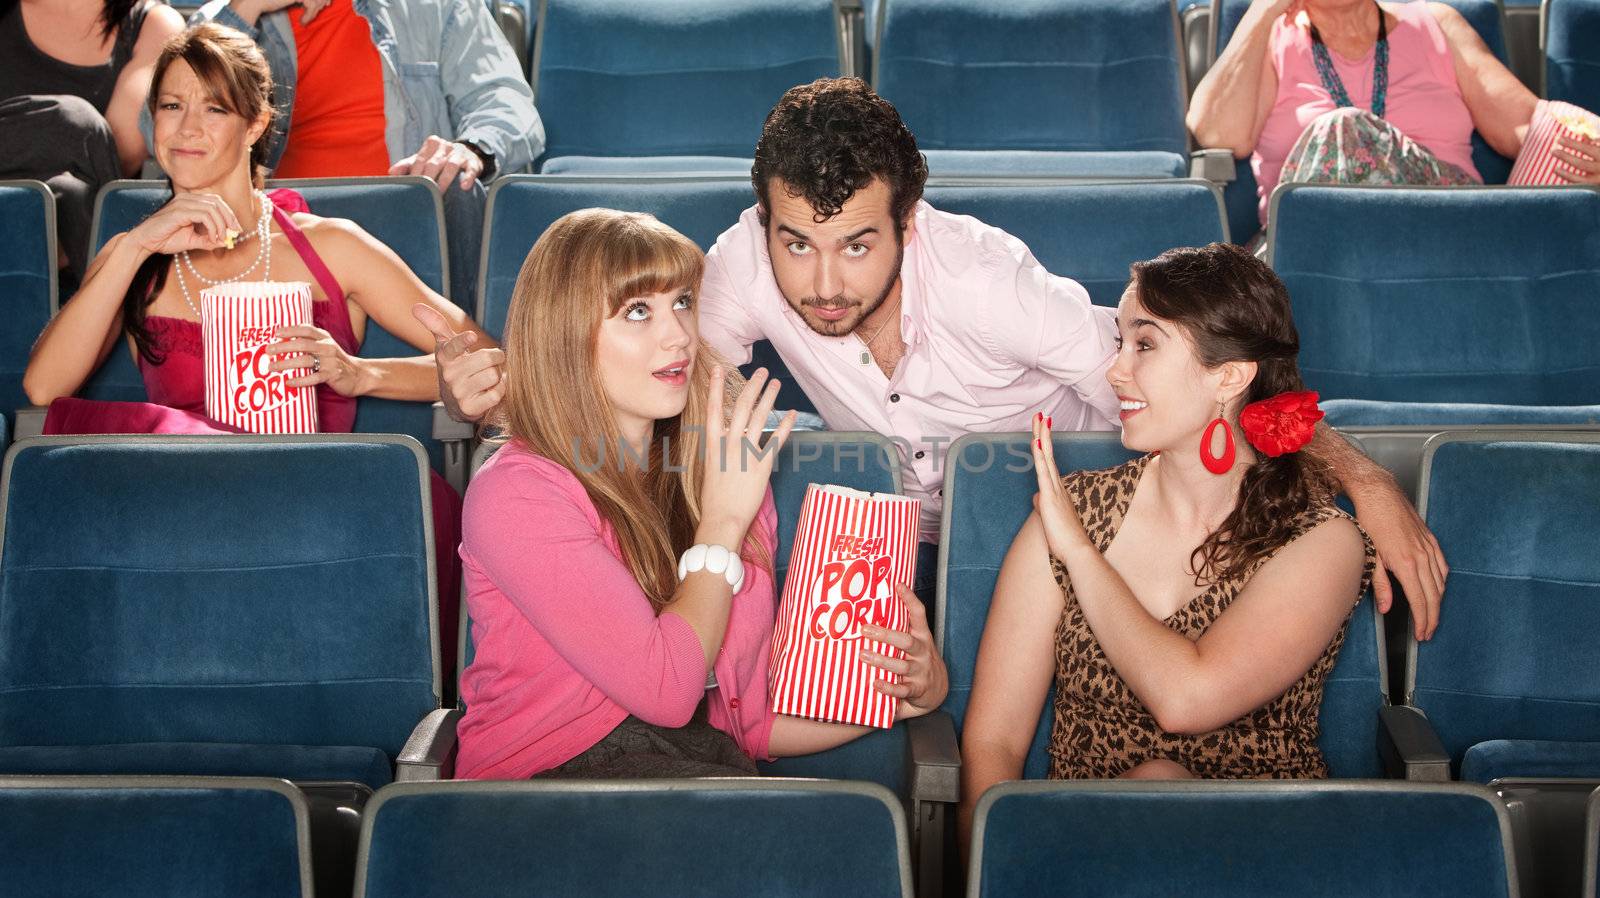 Men and Women Flirting in Theater by Creatista